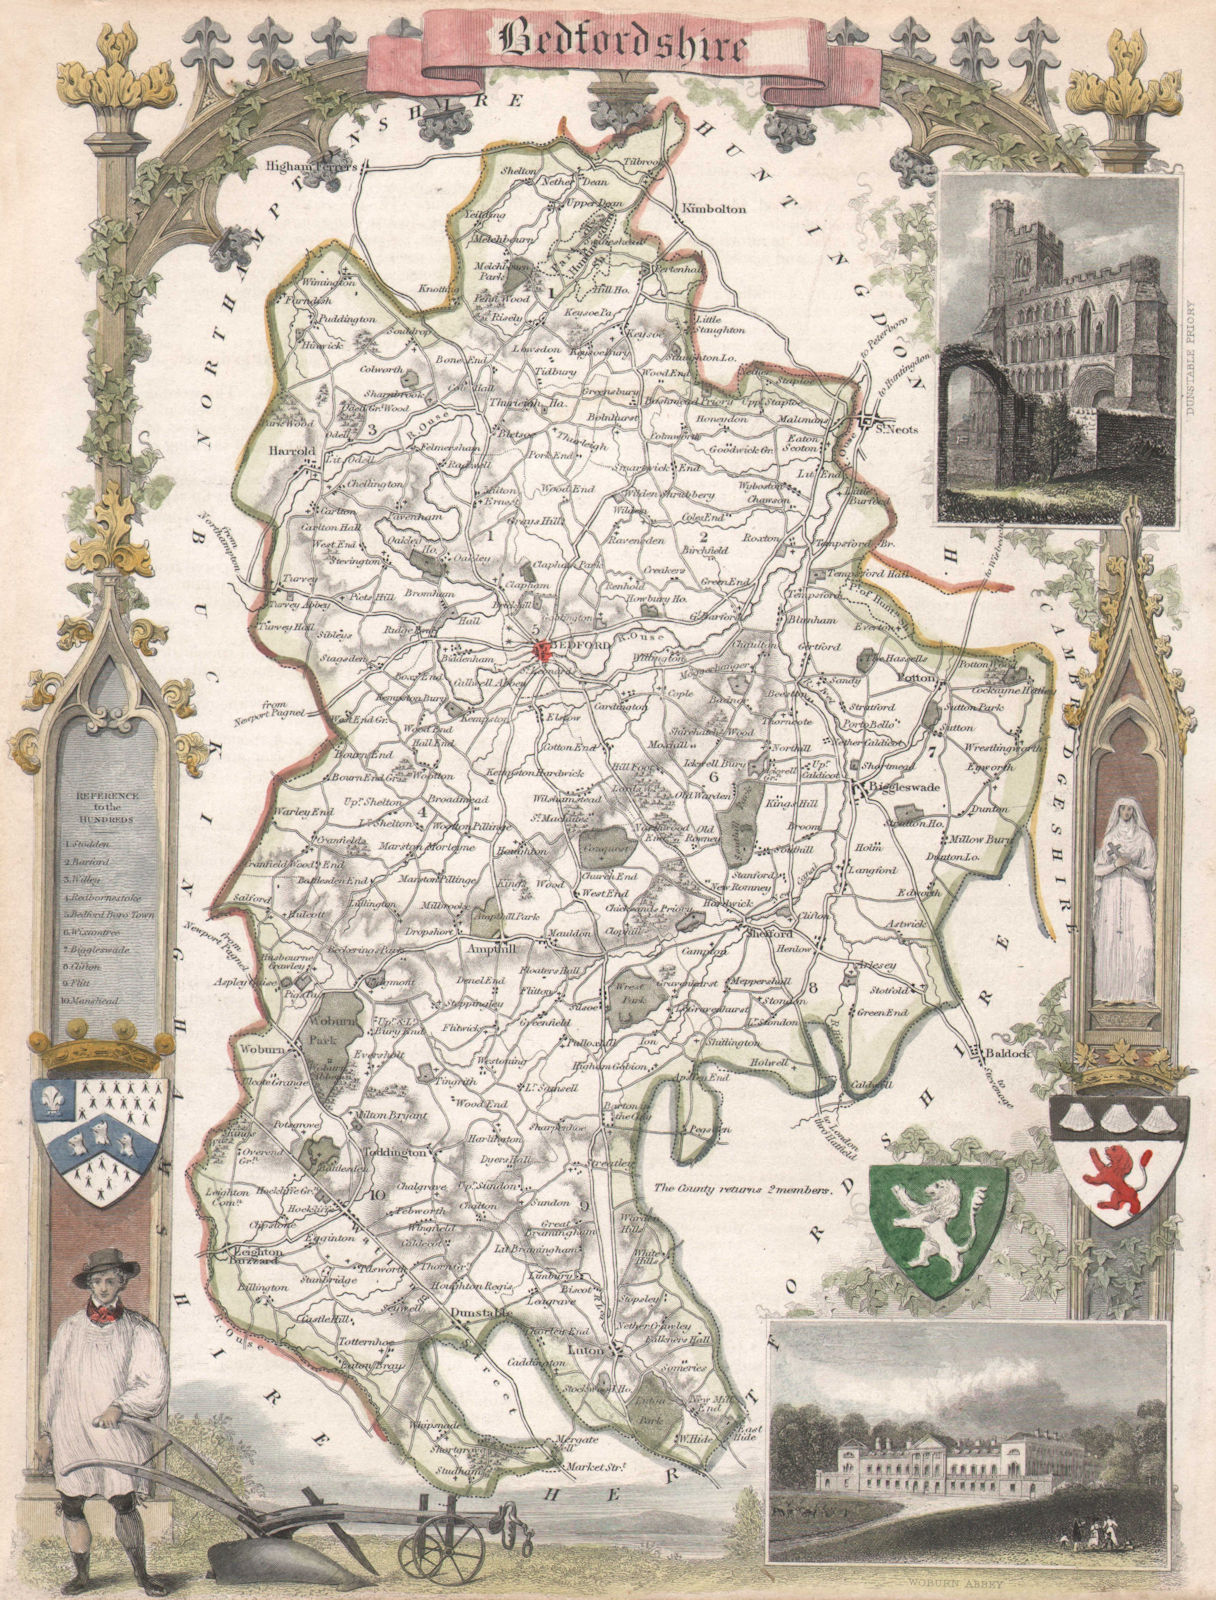 Bedfordshire antique hand-coloured county map by Thomas MOULE c1840 old